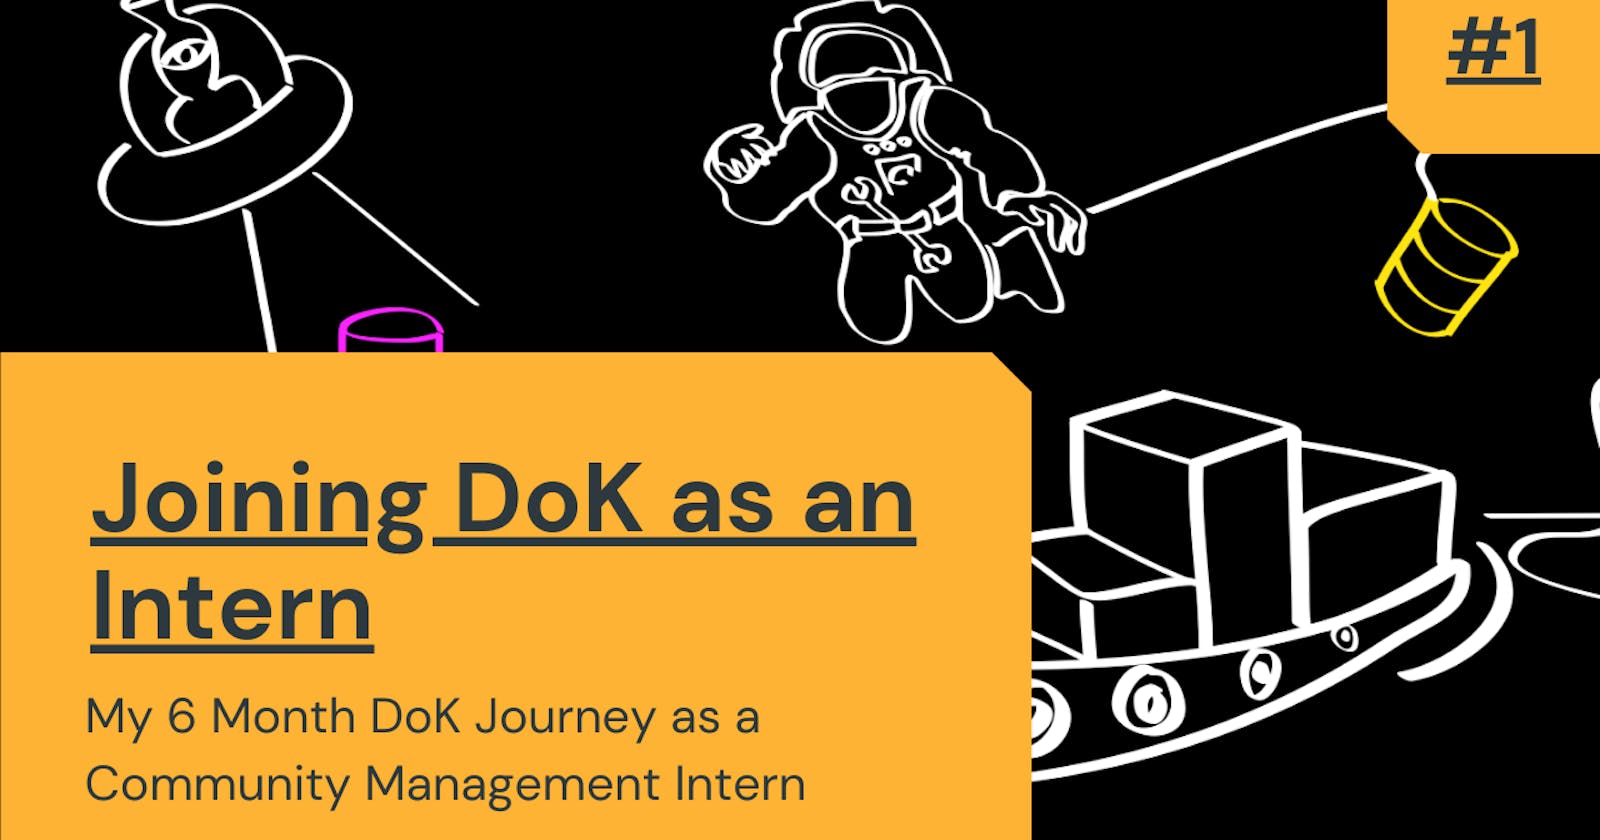 #Week 1: Joining DoK as a Community Management Intern